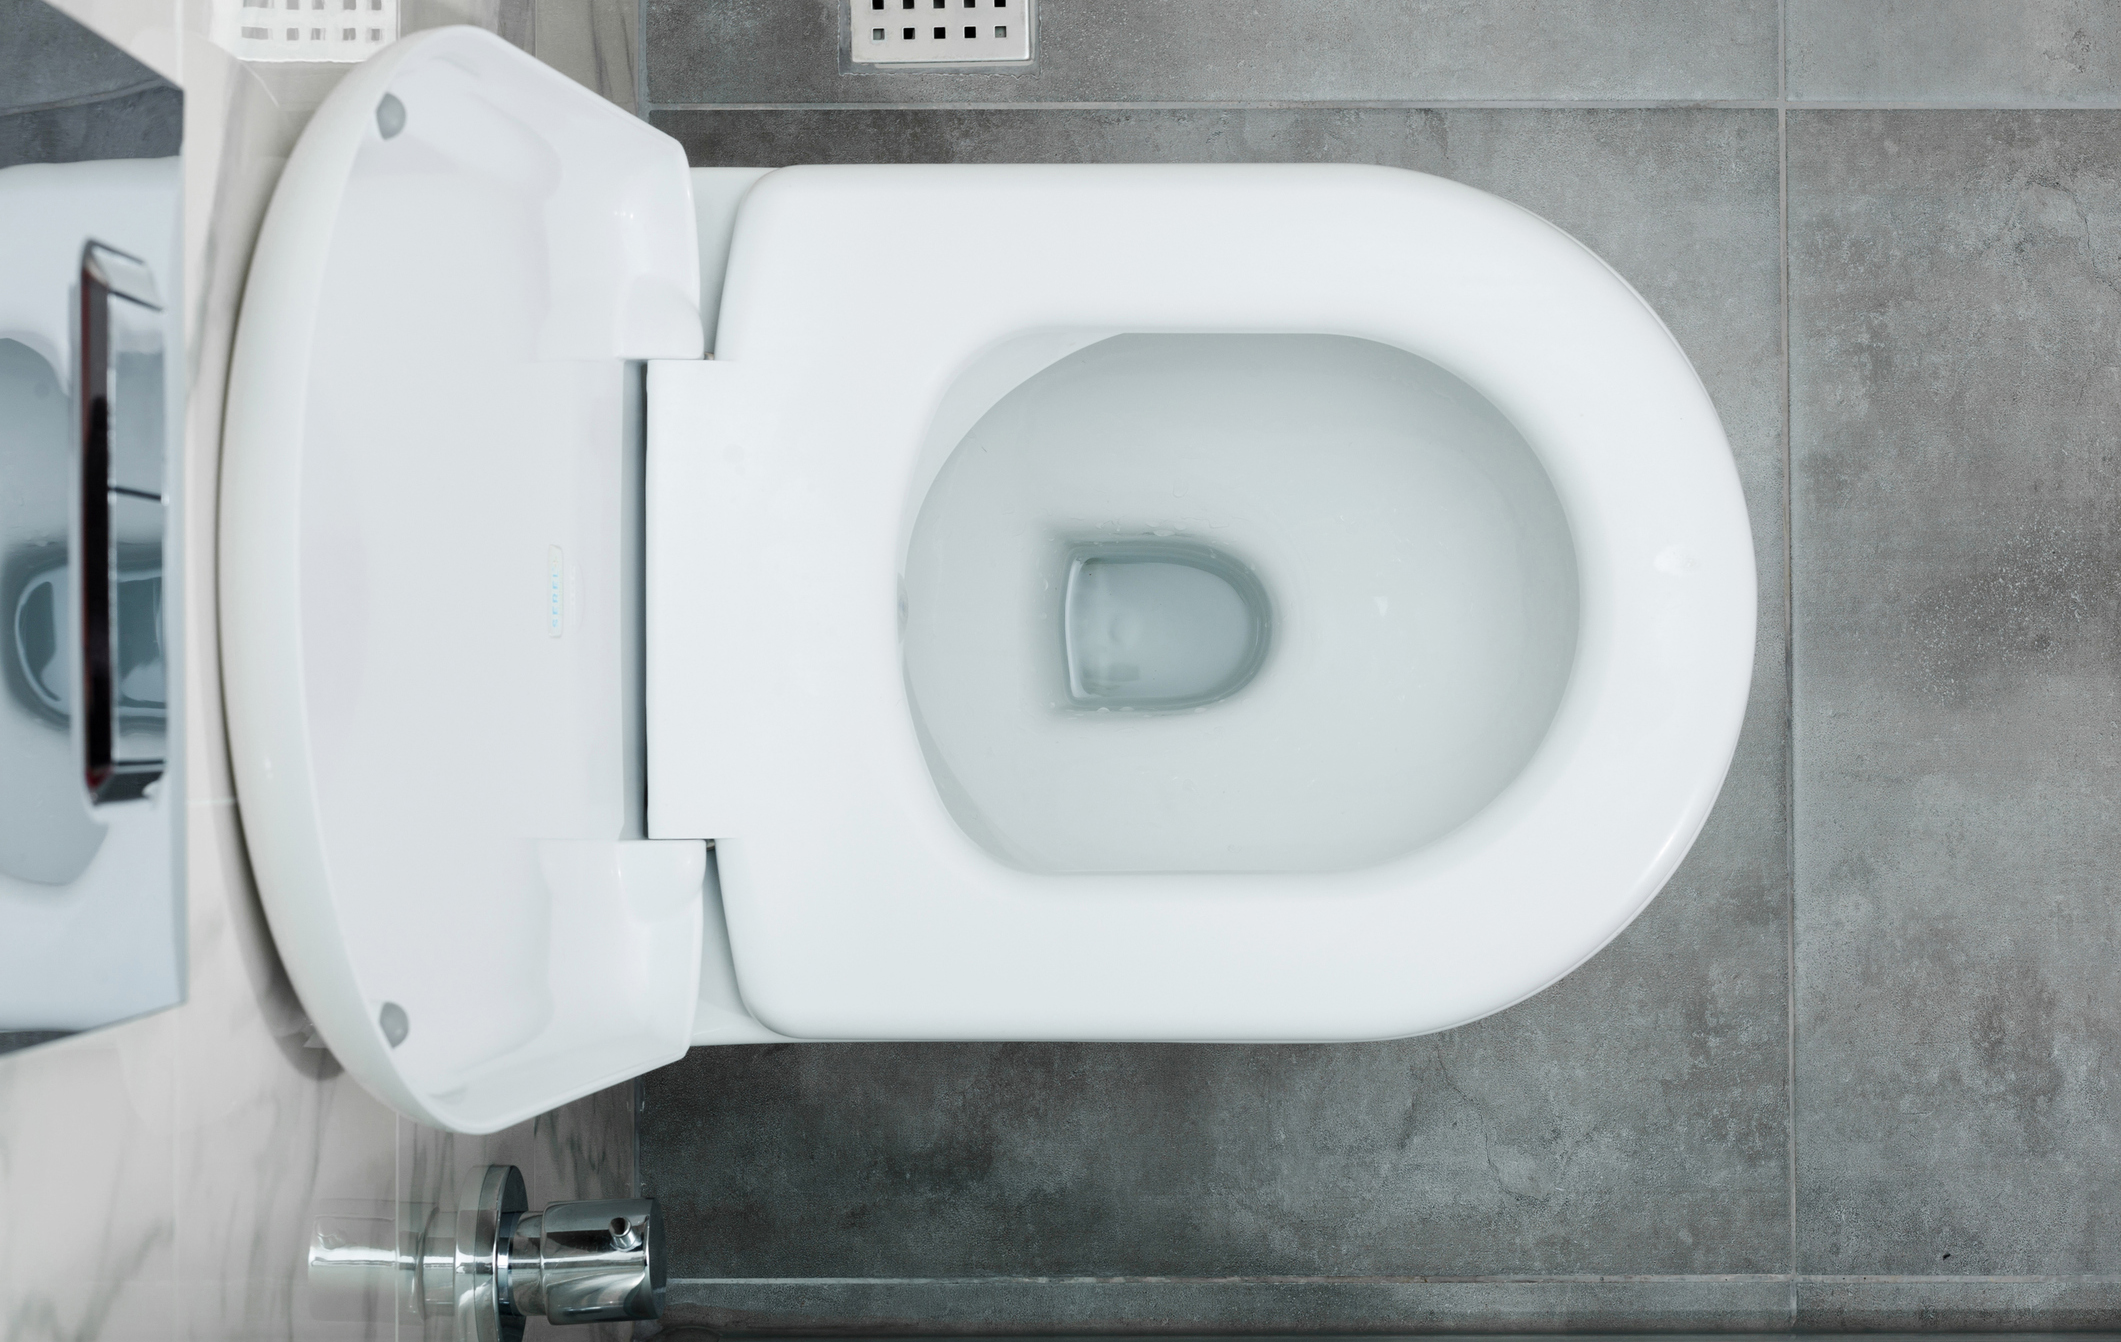 Is it safe to put your hand in the toilet How To Unblock A Toilet The Best Ways To Unclog Your Wc Without A Plunger Or A Plumber Real Homes